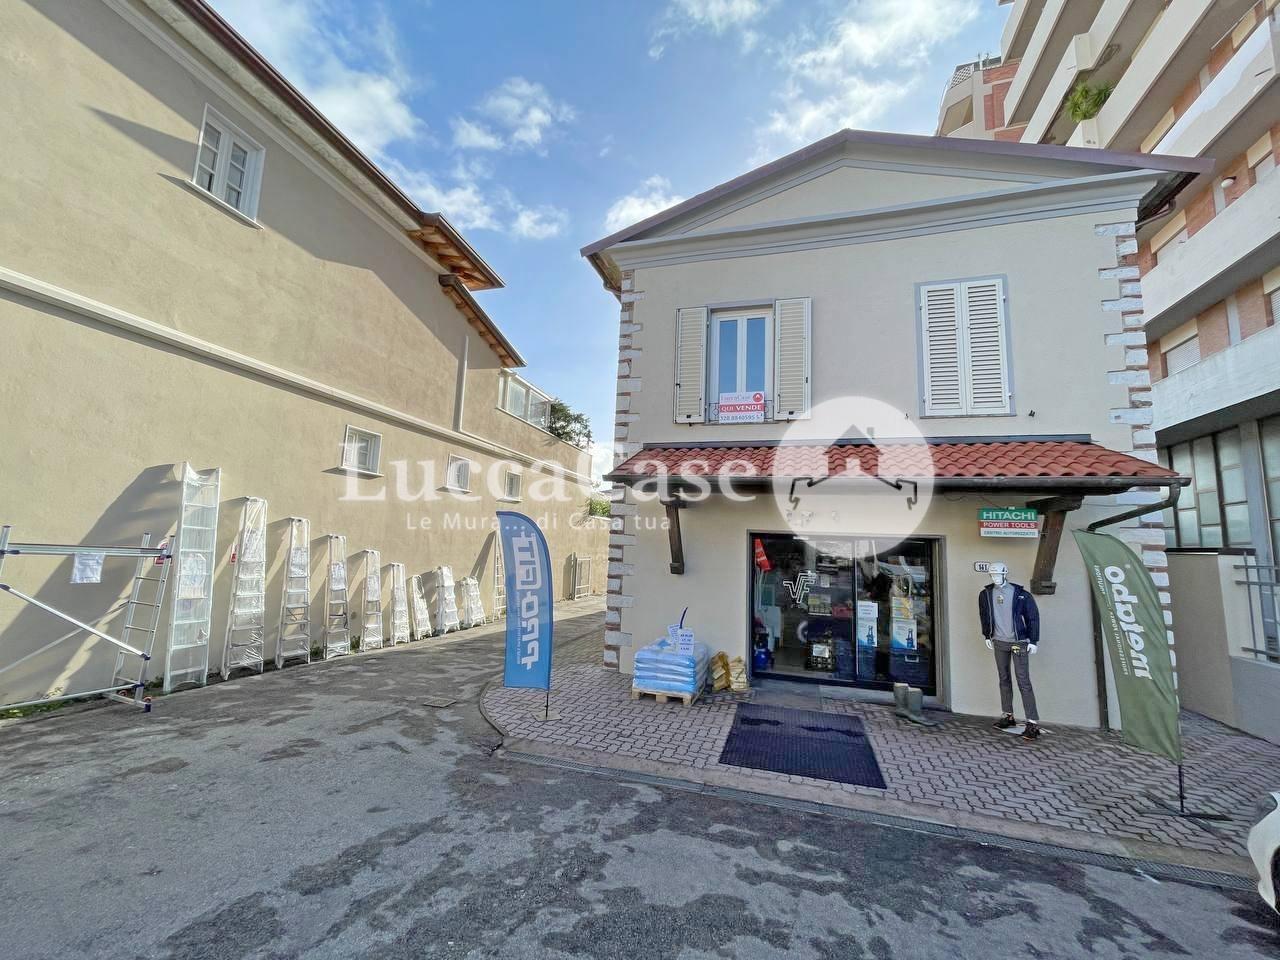 Office for commercial rentals in Seravezza (LU)